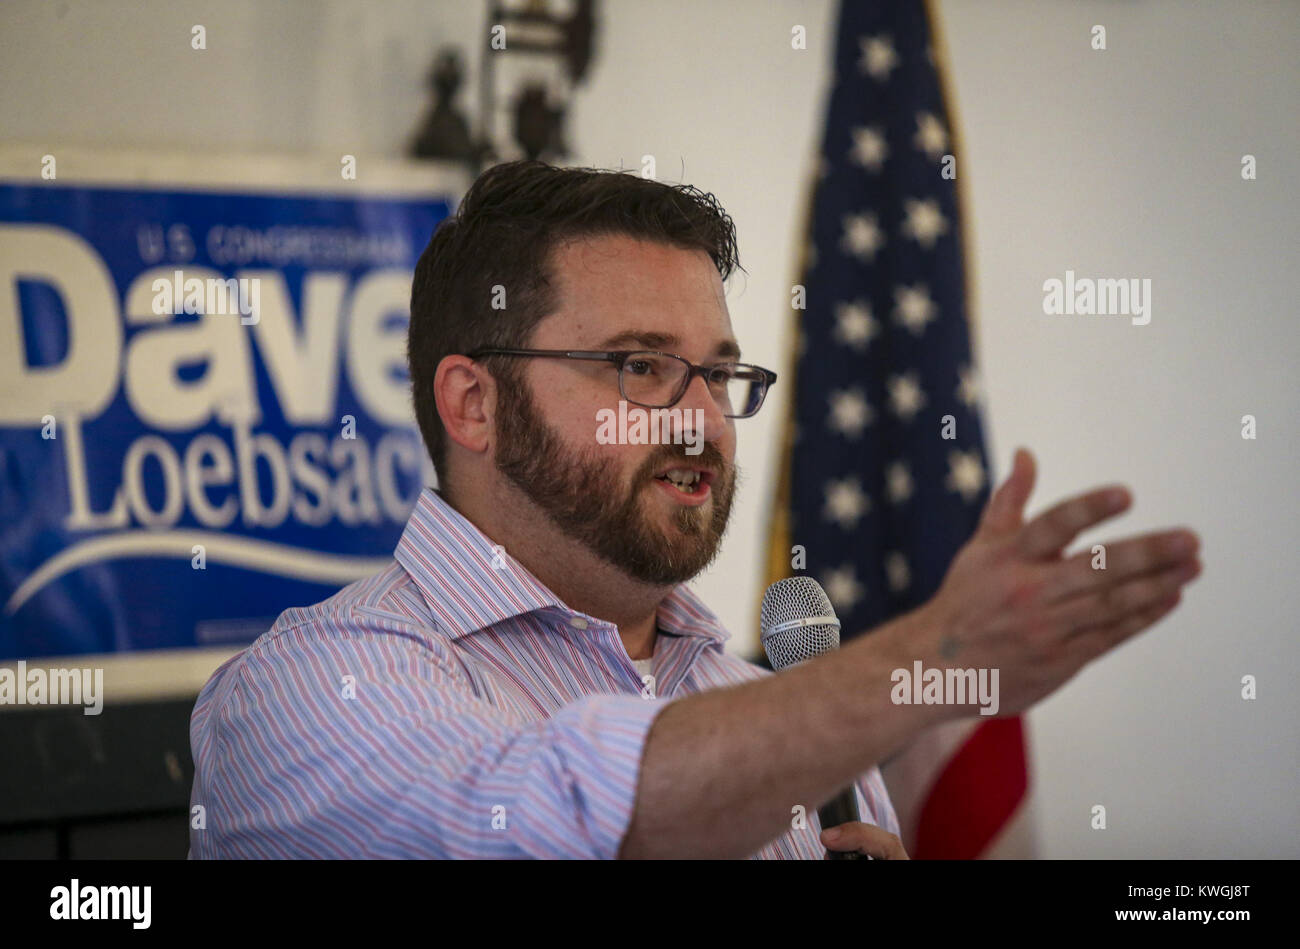 Davenport, Iowa, USA. 20th Aug, 2017. Chairman of the Iowa Democratic Party Troy Price speaks at the Duck Creek Lodge in Davenport on Sunday, August 20, 2017. Scott County Democrats held their summer picnic with four candidates for Iowa governor in attendance. Credit: Andy Abeyta, Quad-City Times/Quad-City Times/ZUMA Wire/Alamy Live News Stock Photo